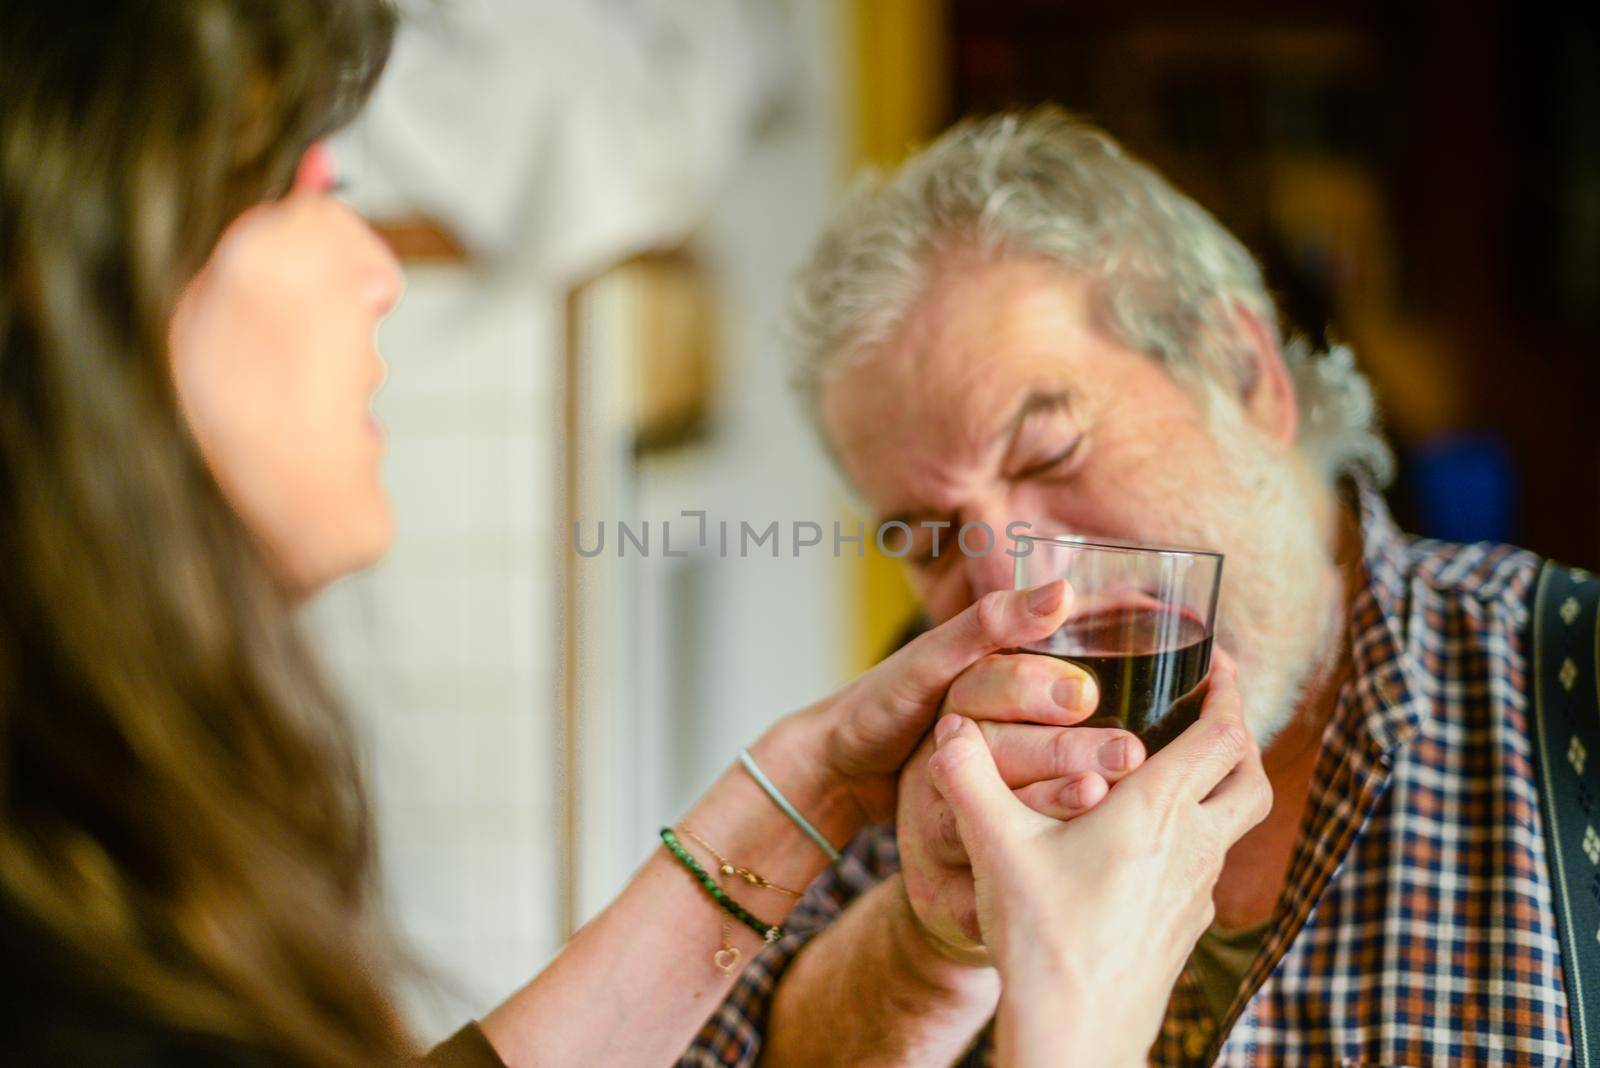 caucasian man drinking wine and getting drunk at home stressing younger hispanic woman wife - alcoholism and domestic violence concept by verbano